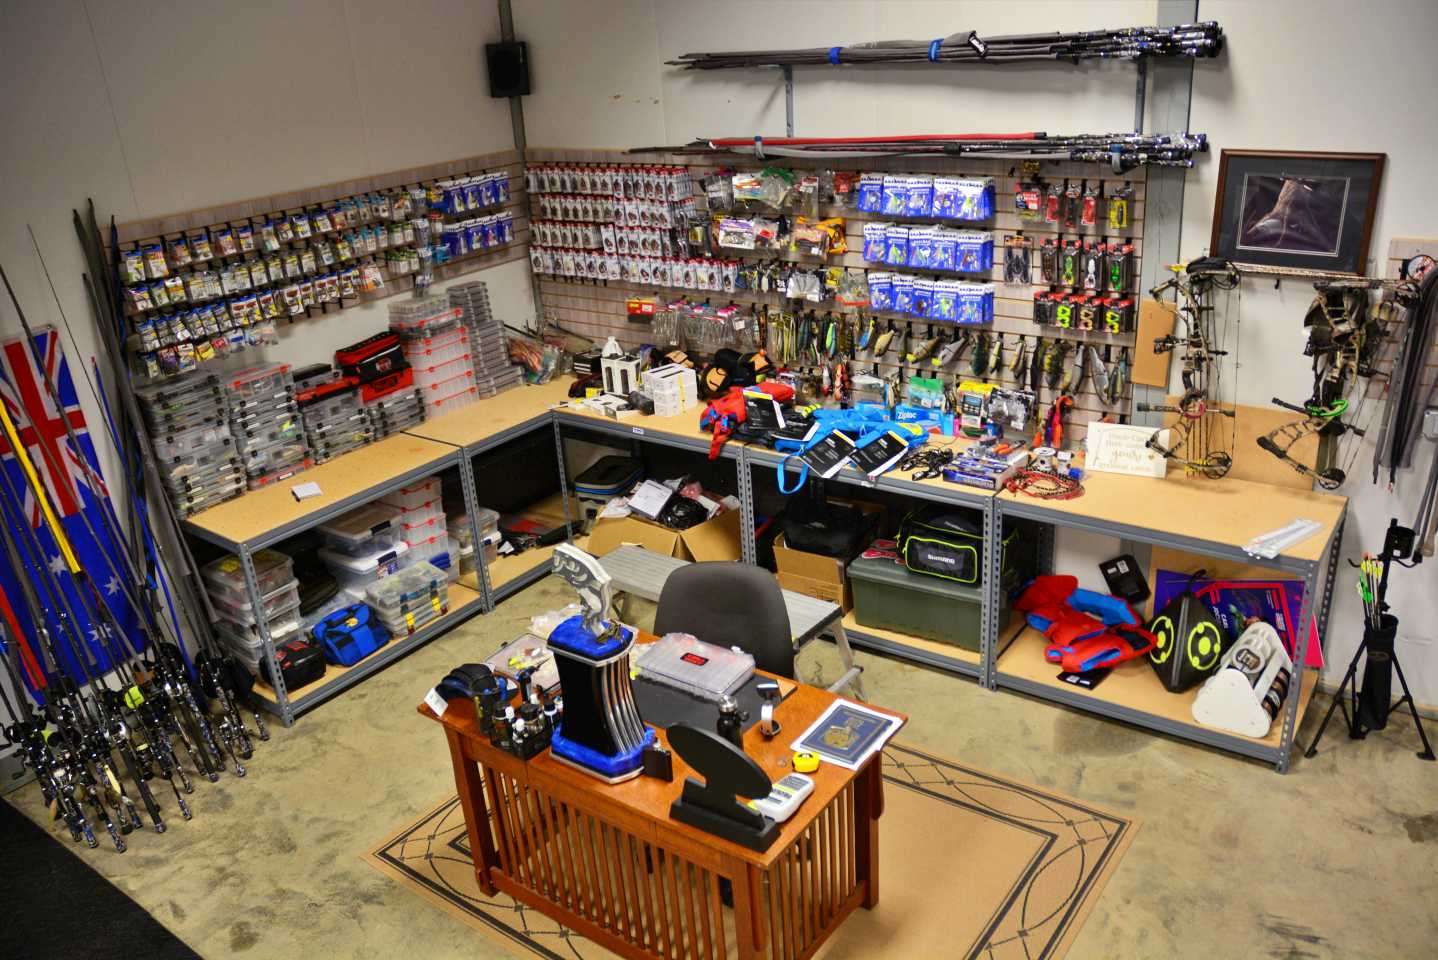 The remaining space is best summed up as the man cave. It is where Carl prepares for the Bassmaster Elite Series season to come. 